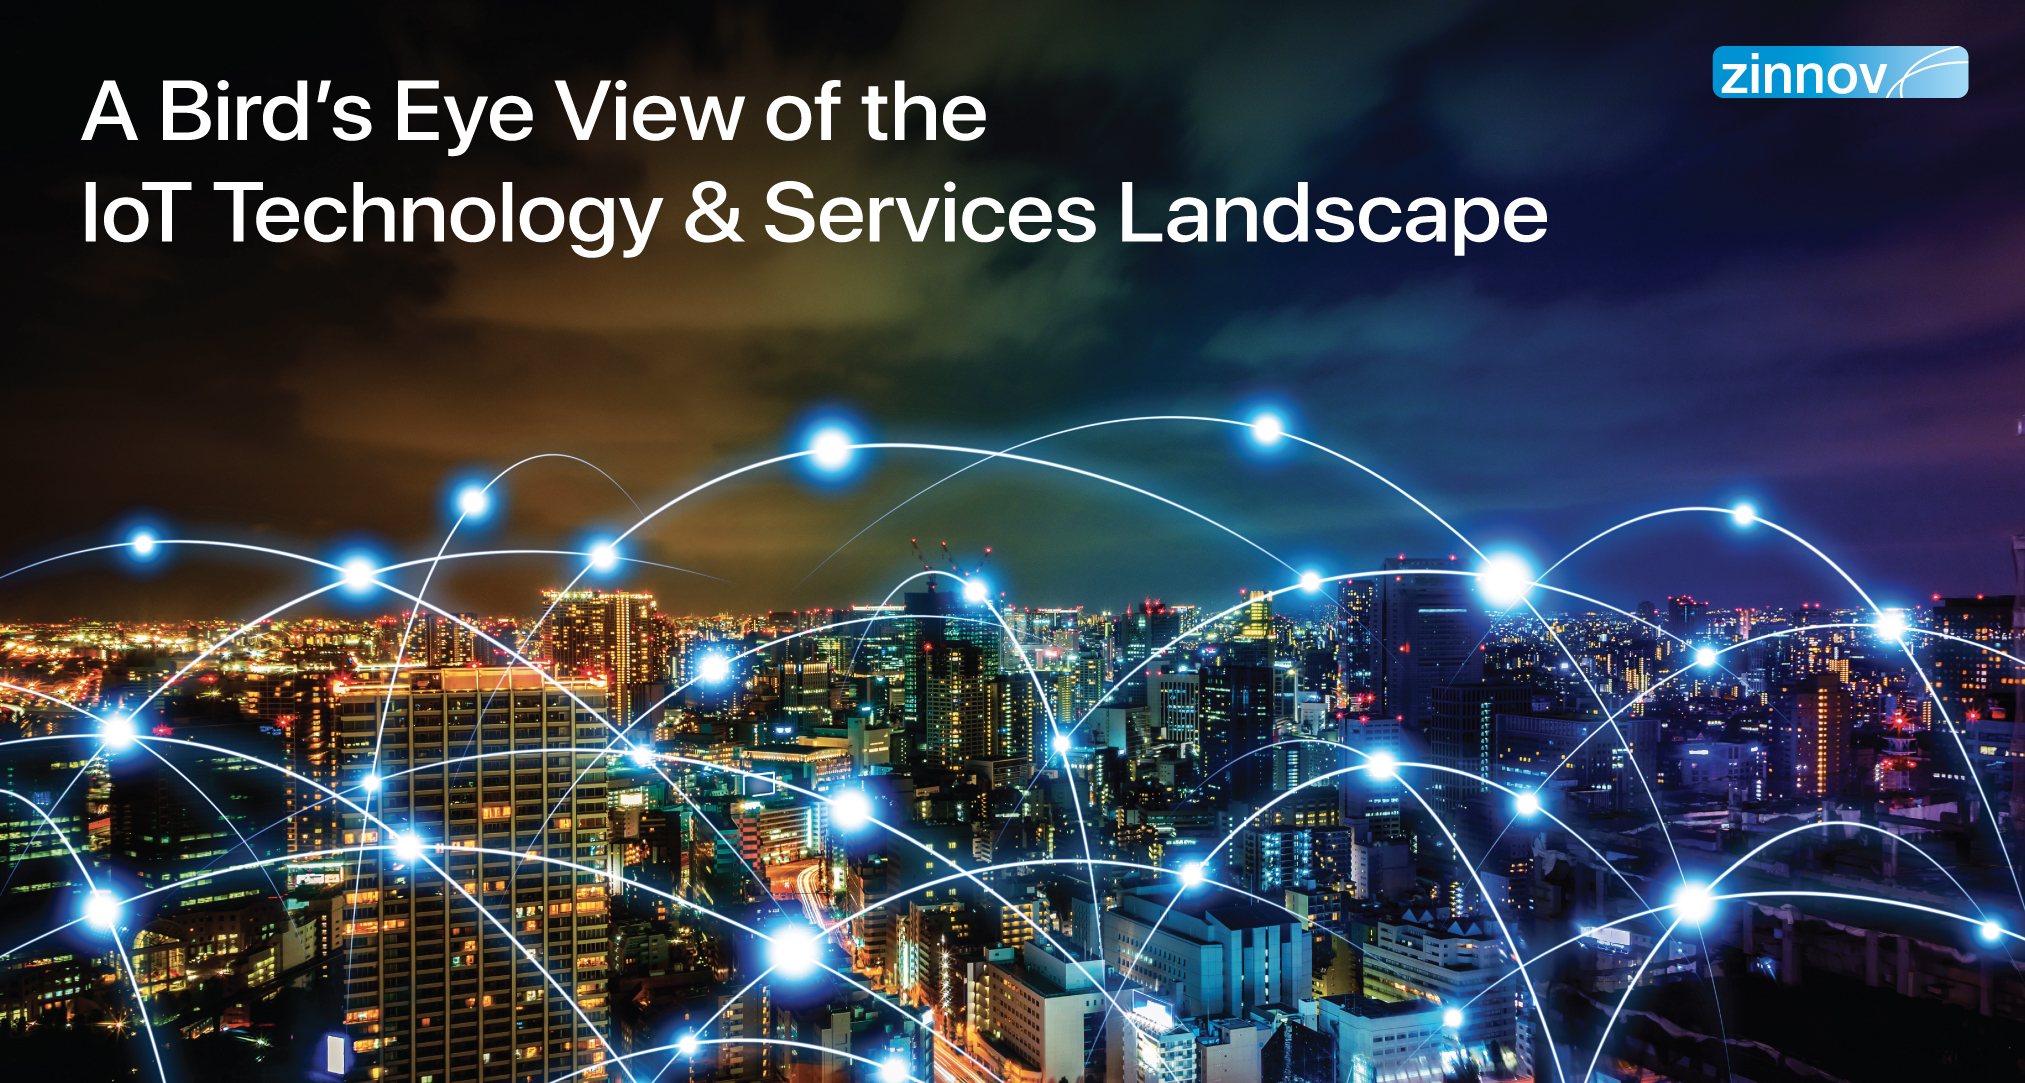 A bird's eye view of the IoT technology & services landscape